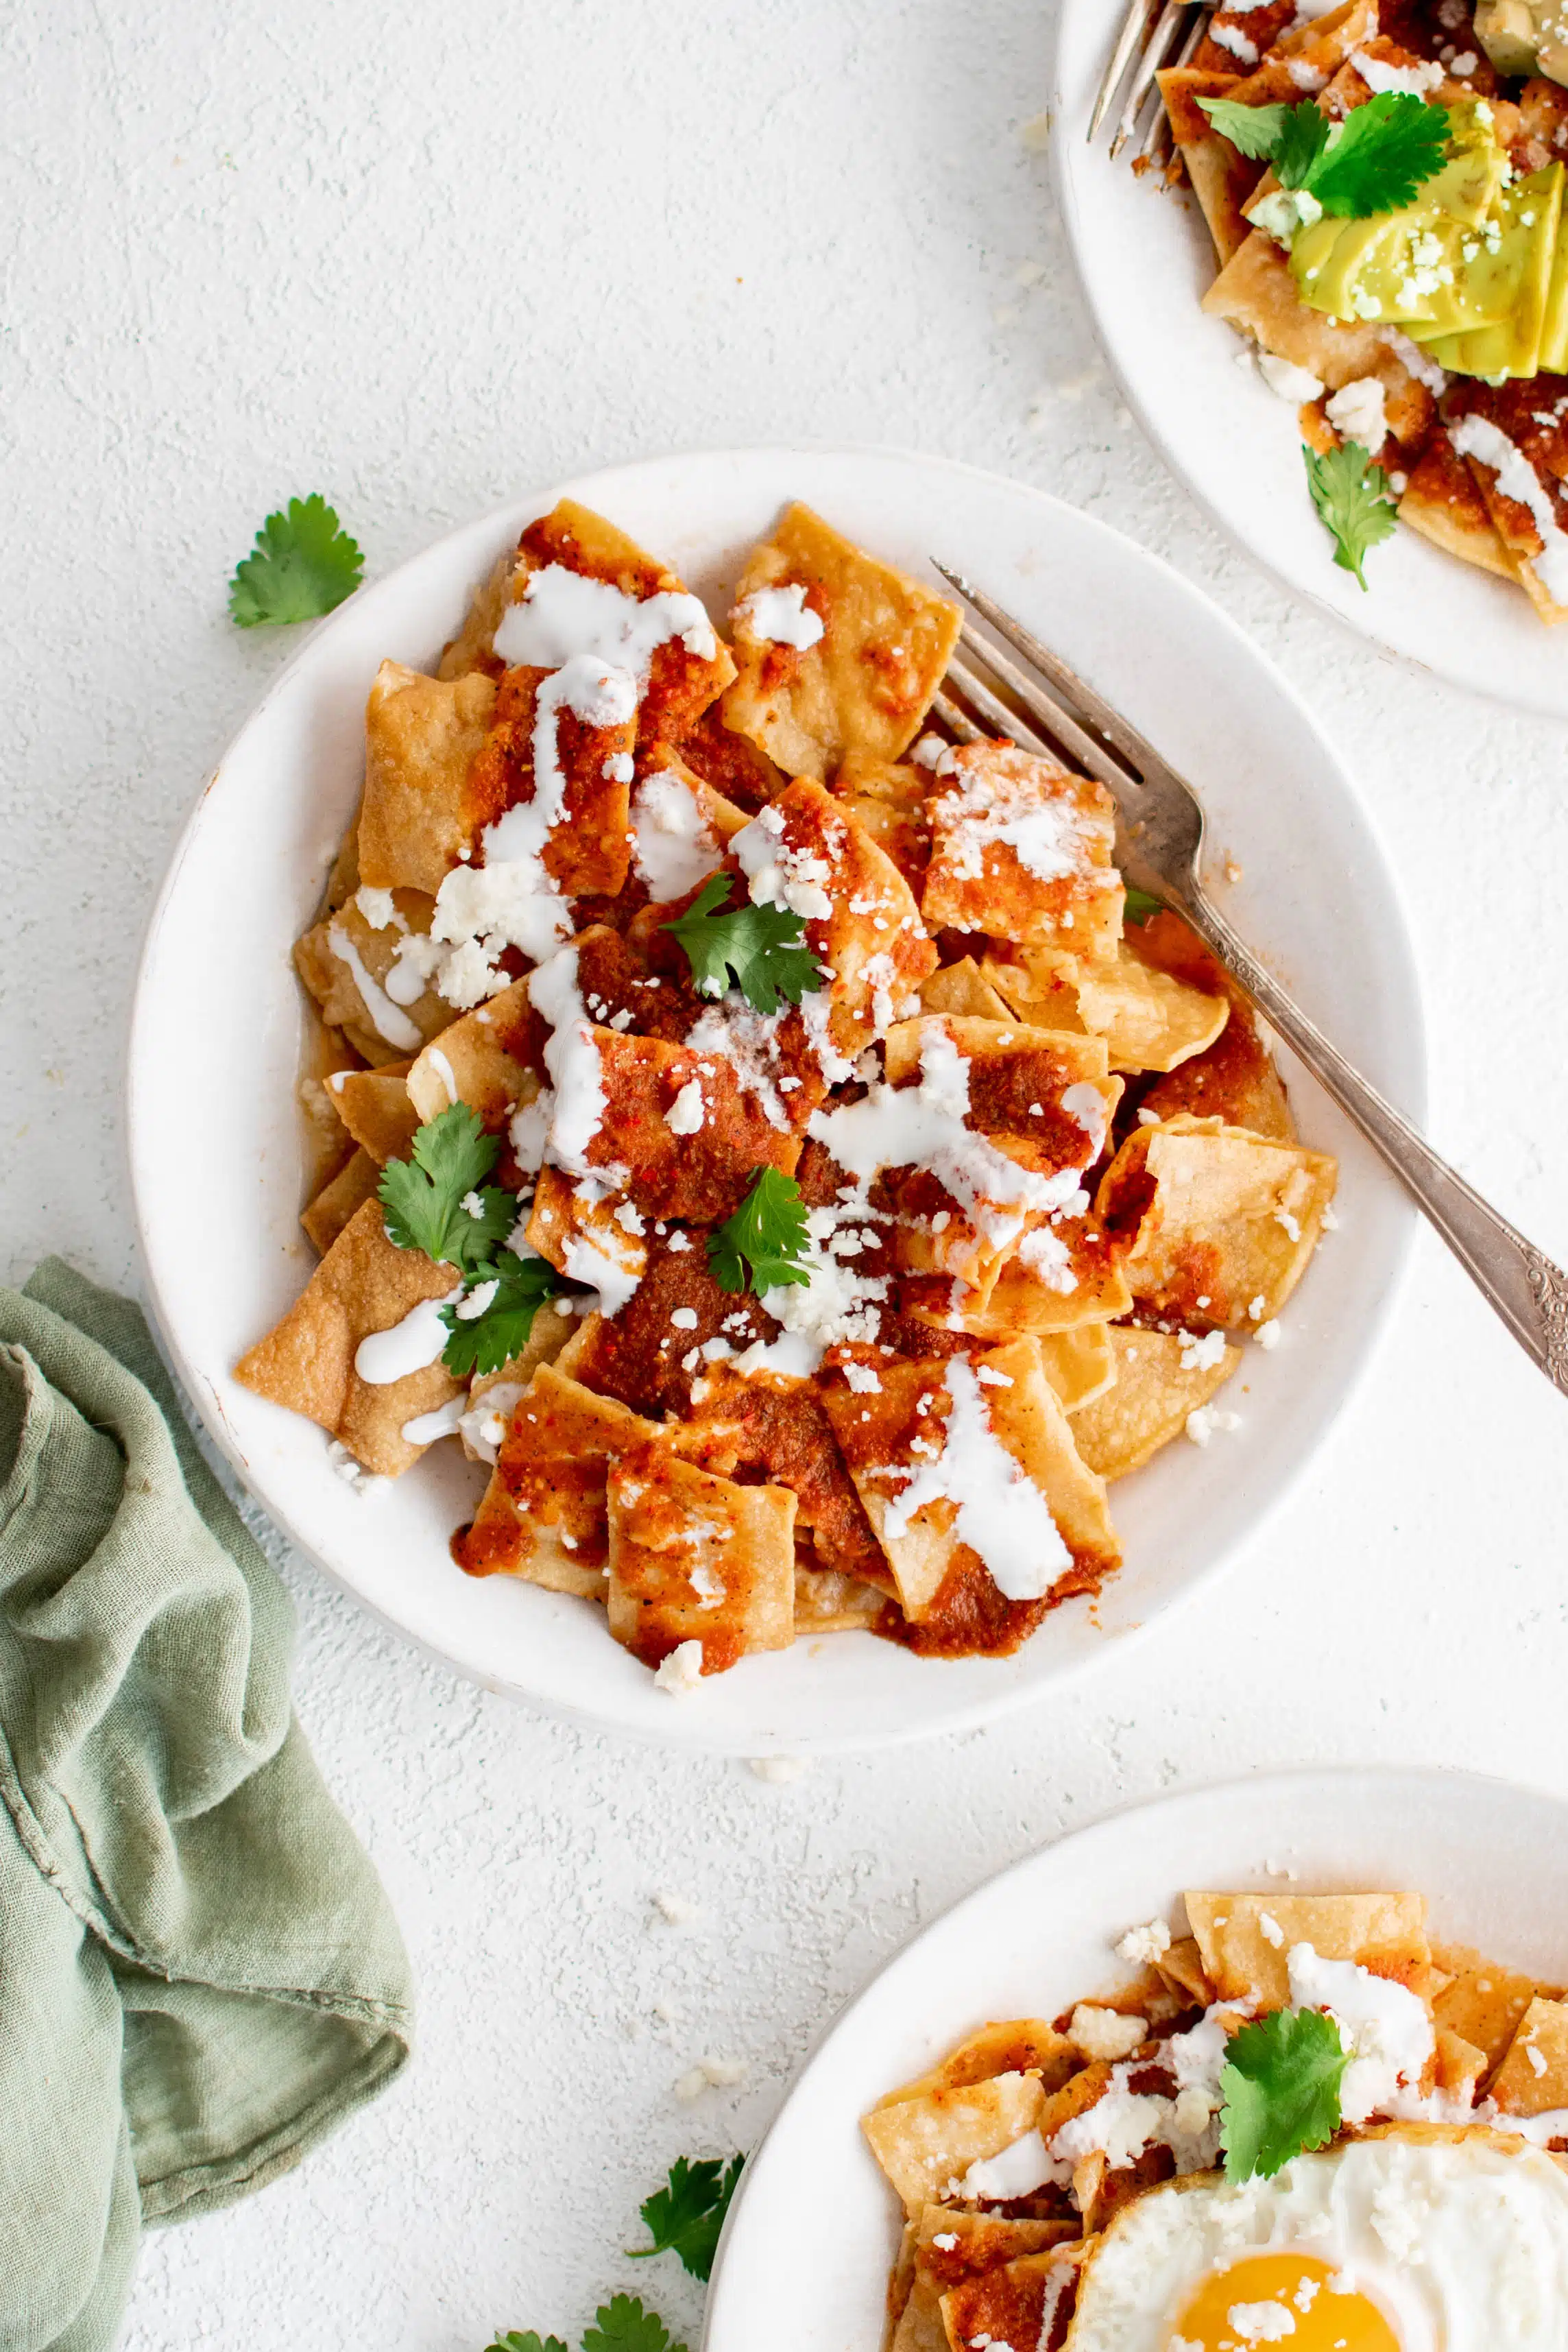 White plate filled with fried corn tortilla chips covered in salsa rojo sauce and drizzled with crema and crumbled cojita cheese and fresh cilantro.